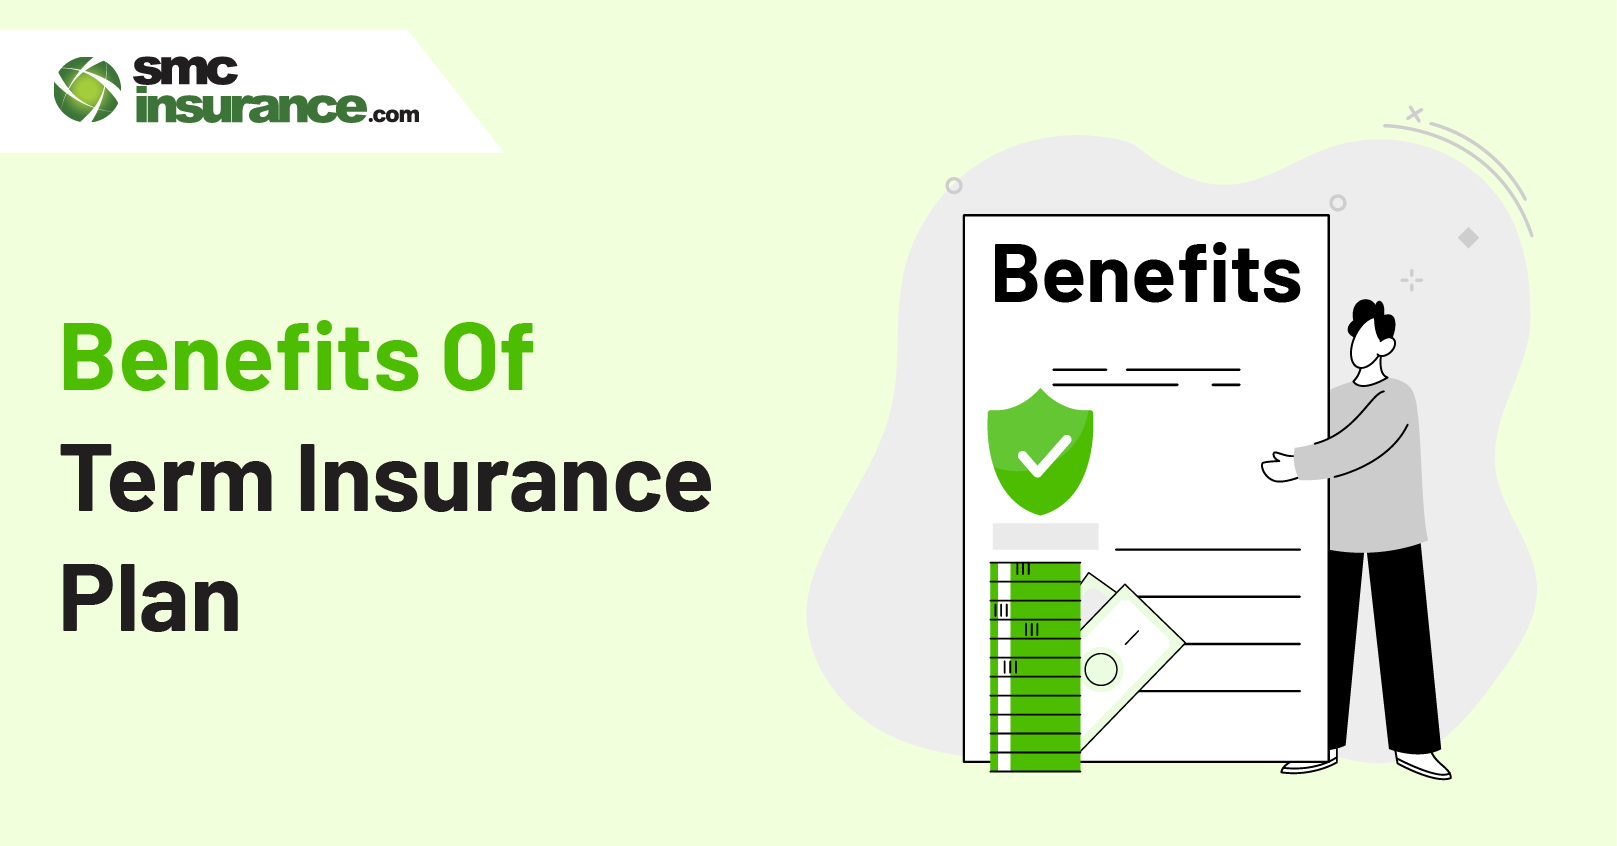 Benefits Offered By A Term Insurance Plan